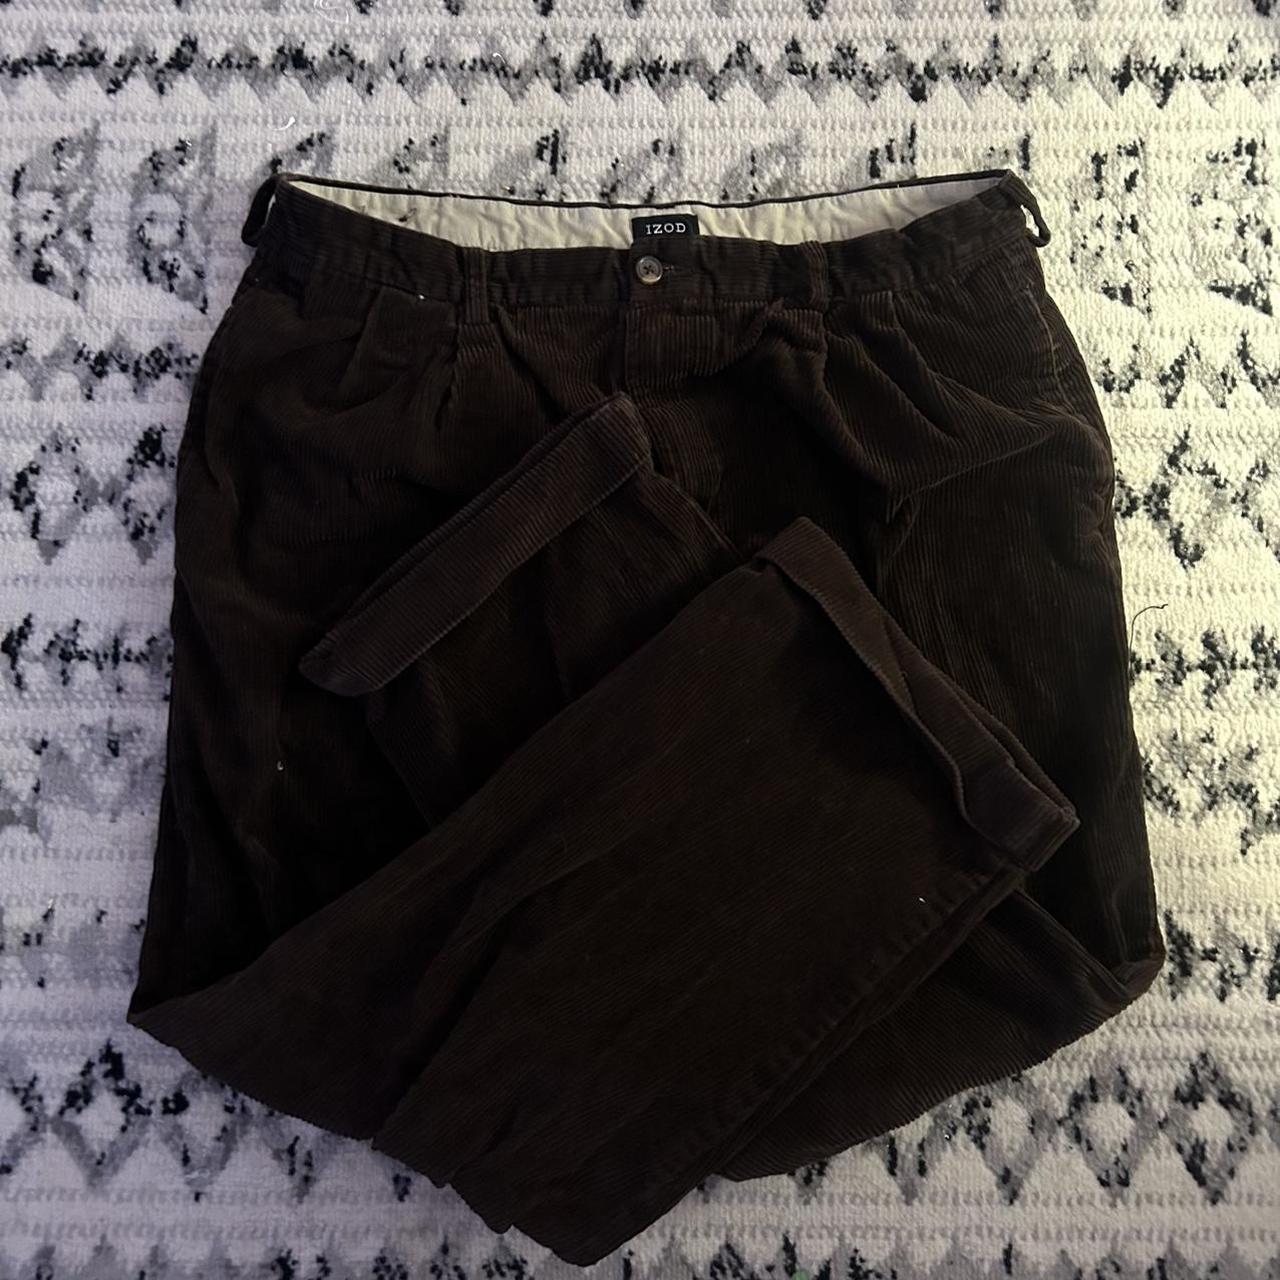 Brown Cords - Perfect Baggy brown cords perfect... - Depop